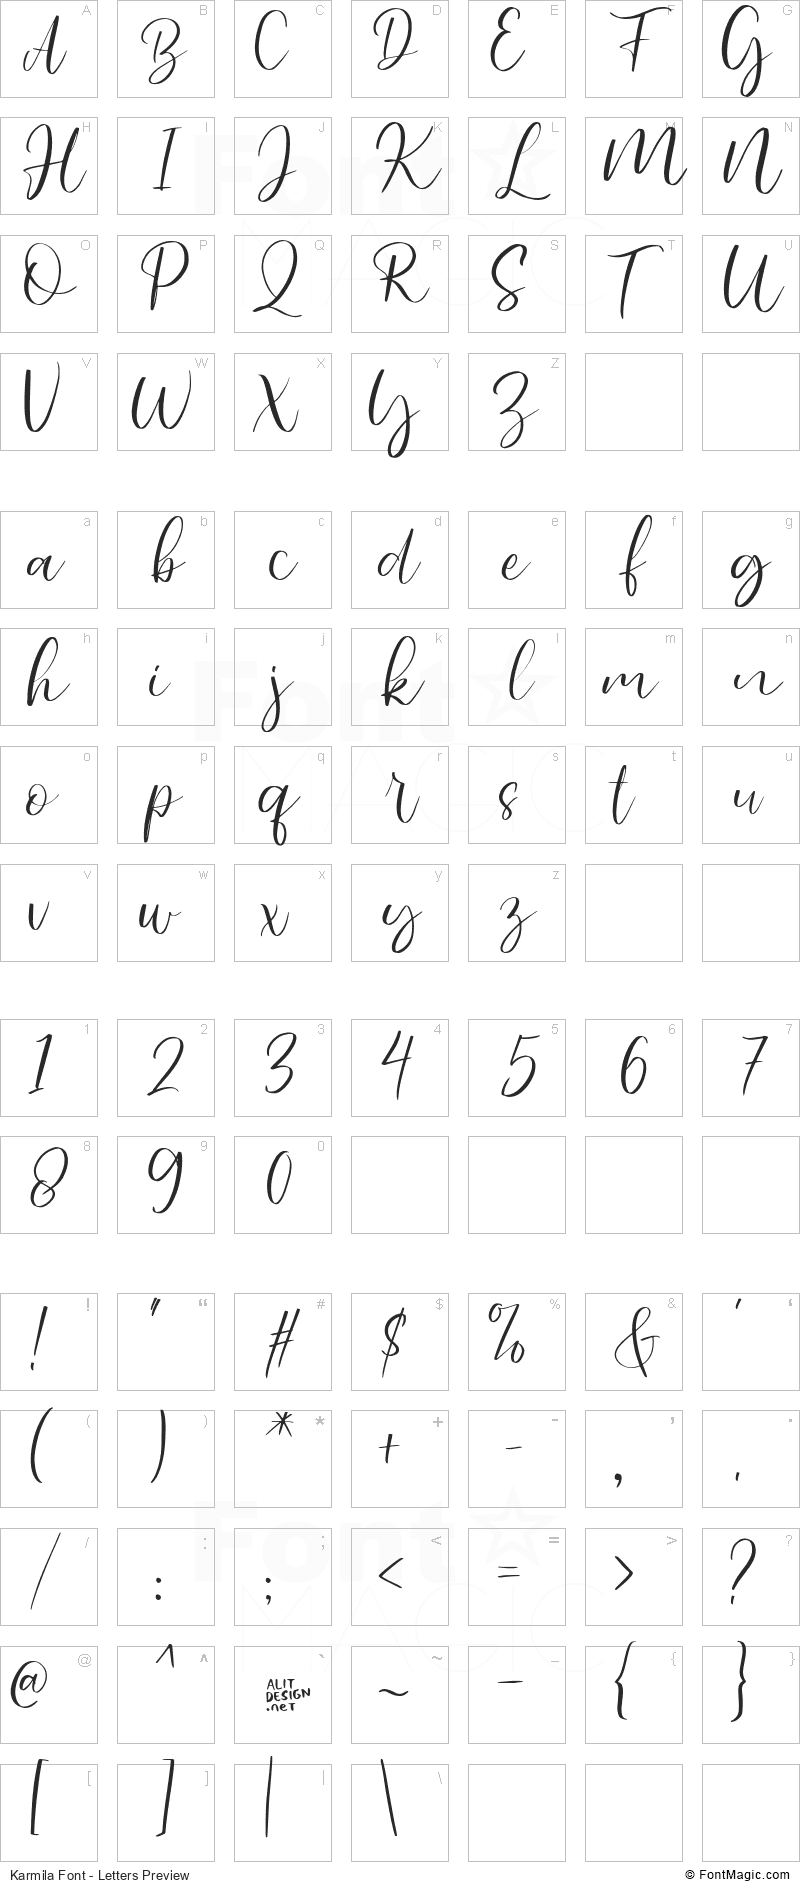 Karmila Font - All Latters Preview Chart